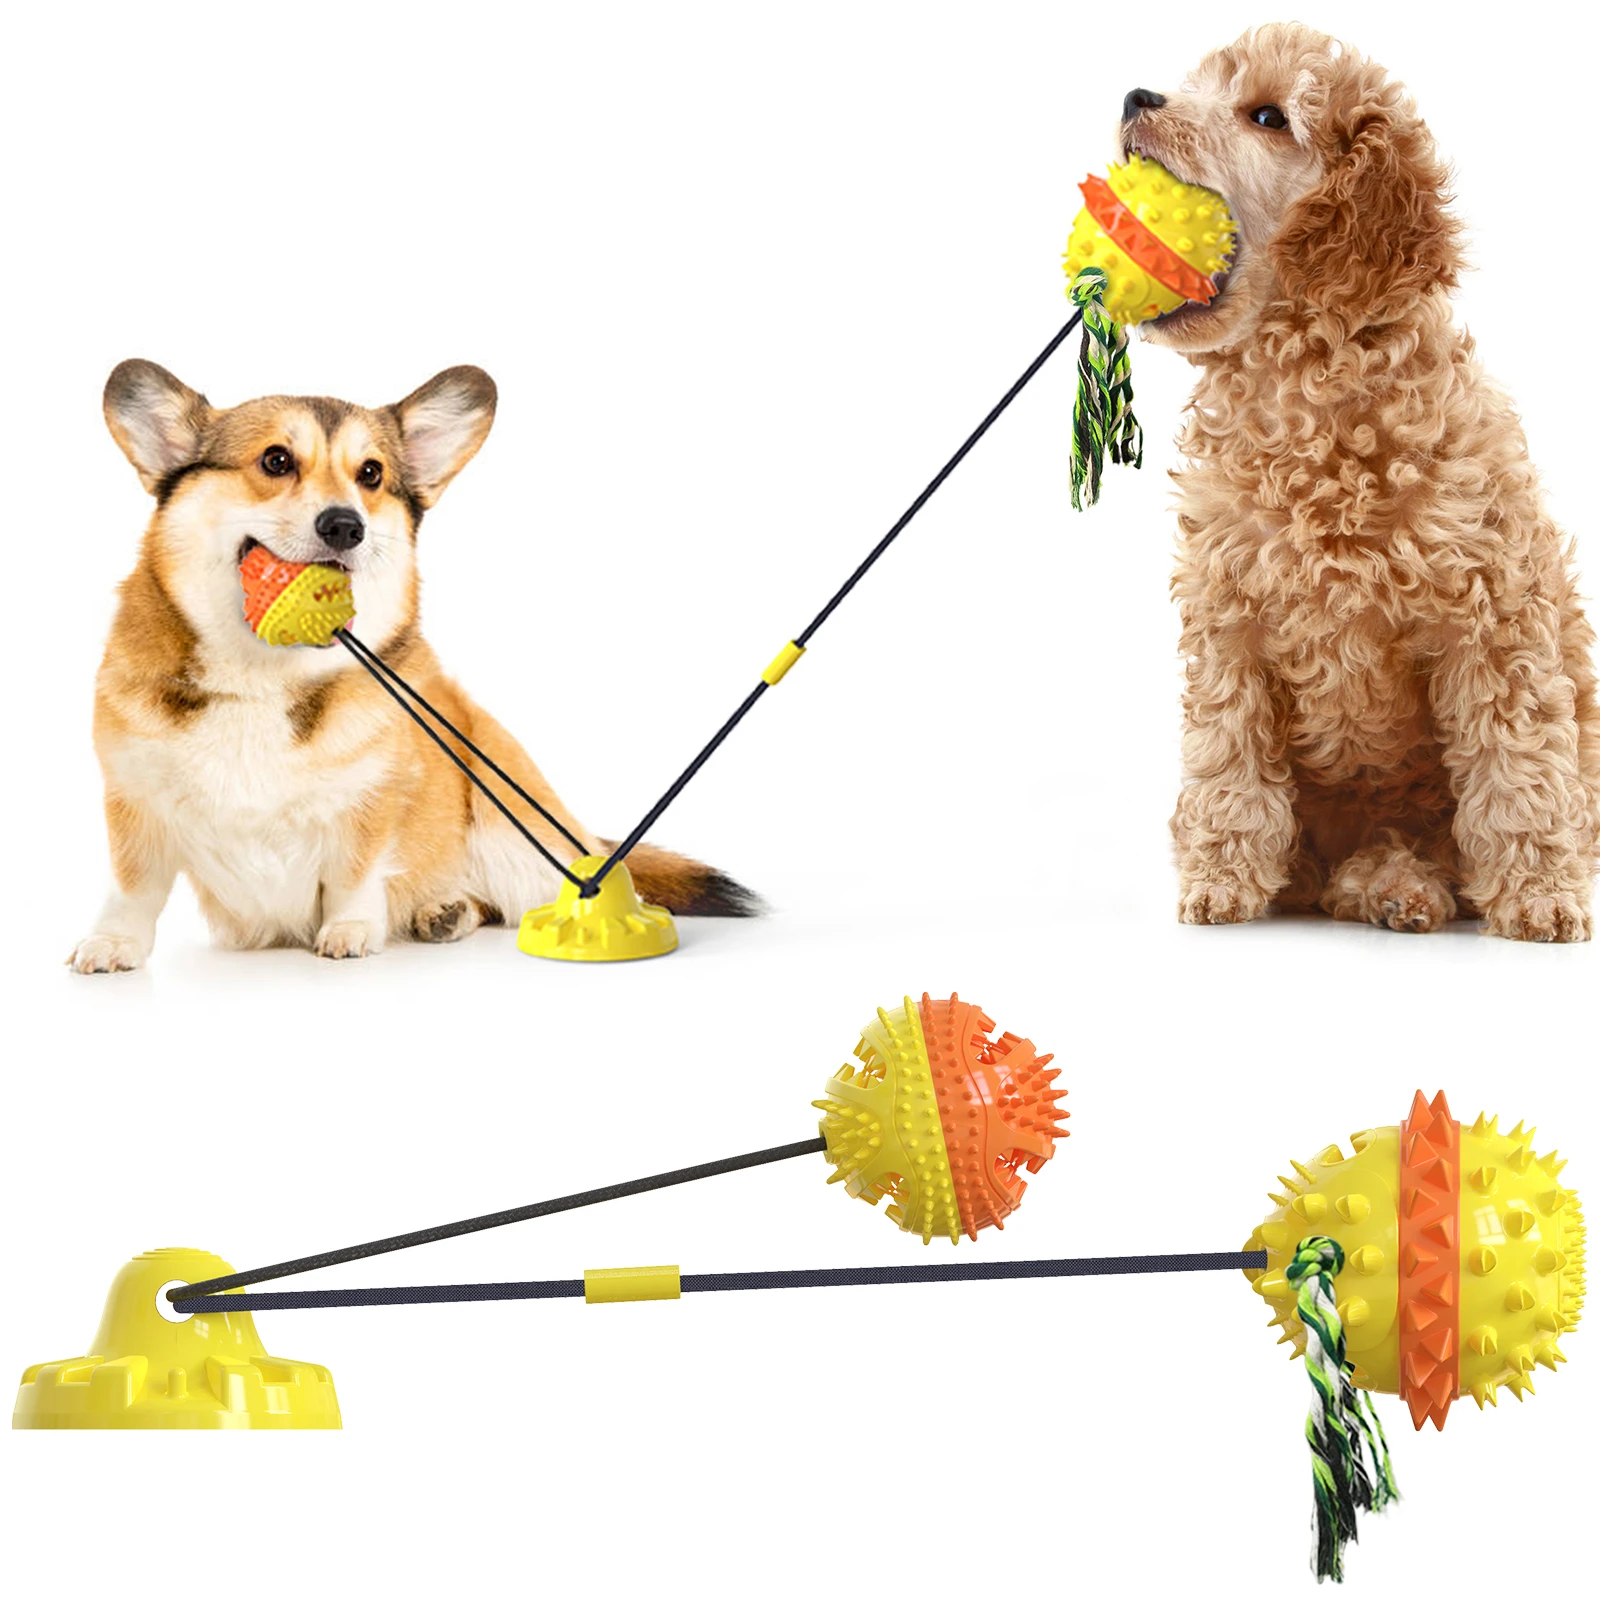 Factory indestructible dog ballsuction cup biting dog toy chew rope toys dog rope toy